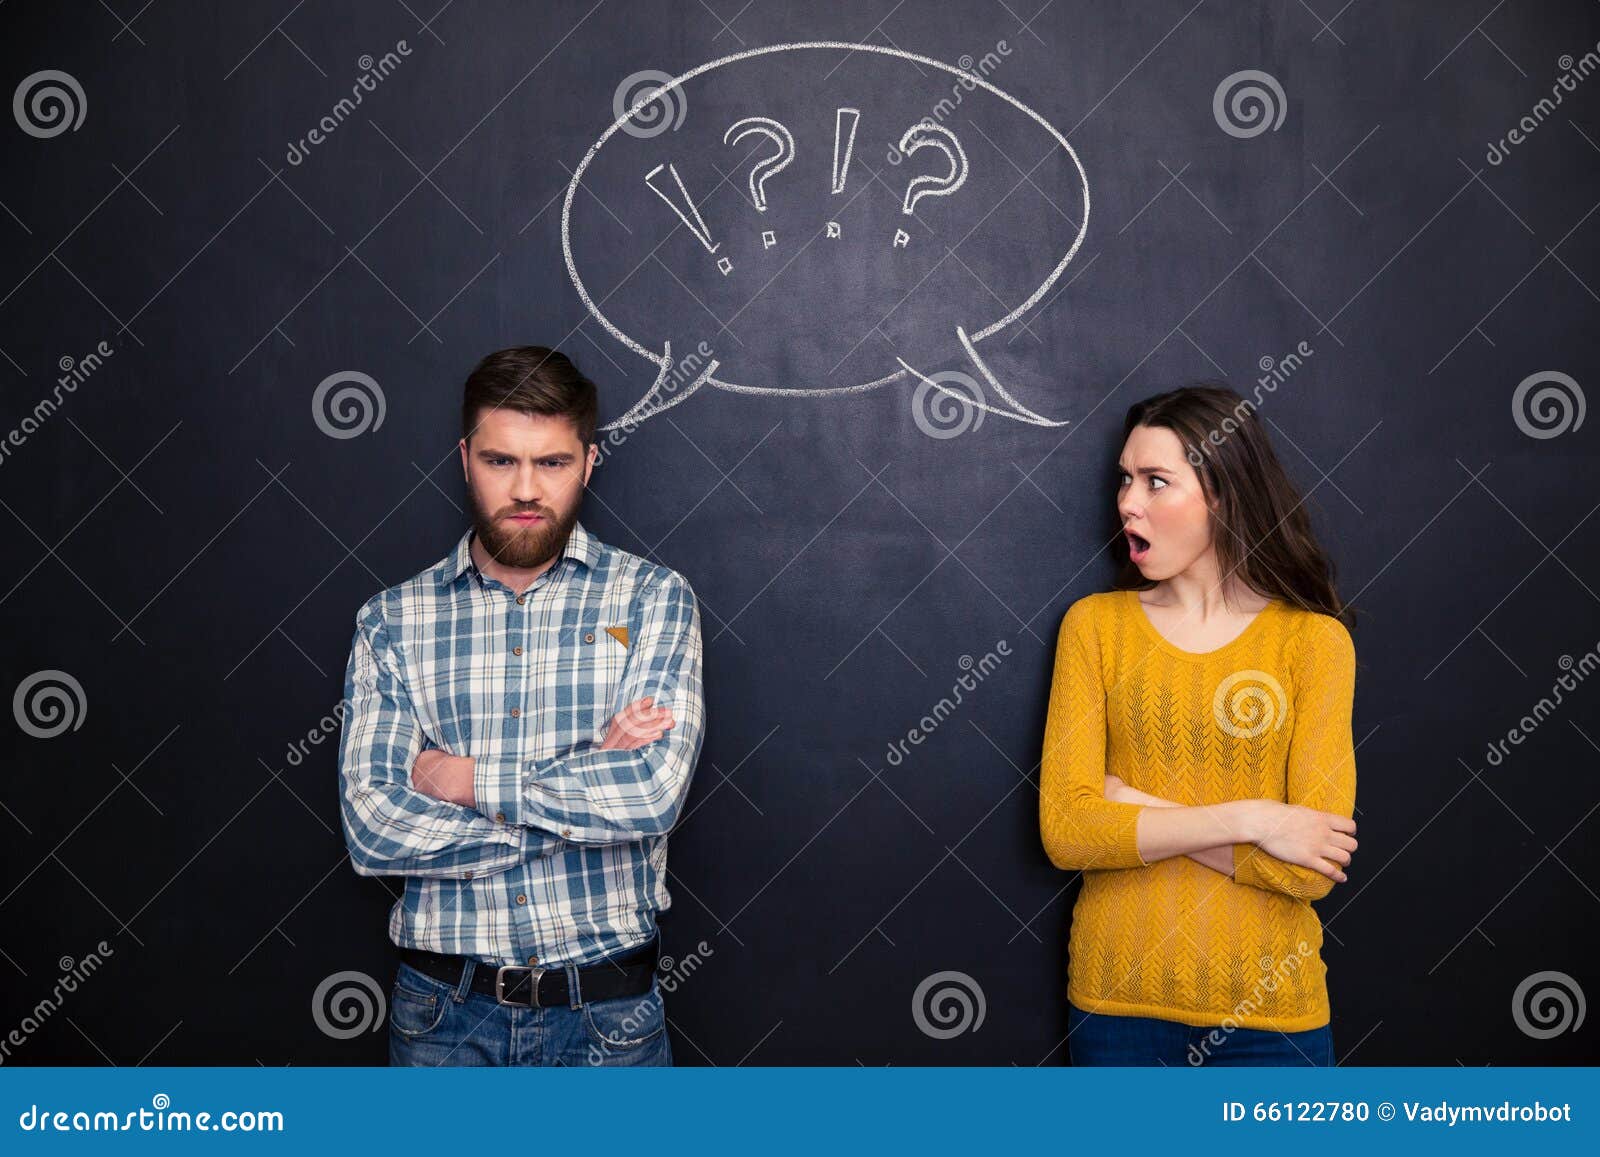 frowning couple standing after argument over chalkboard background